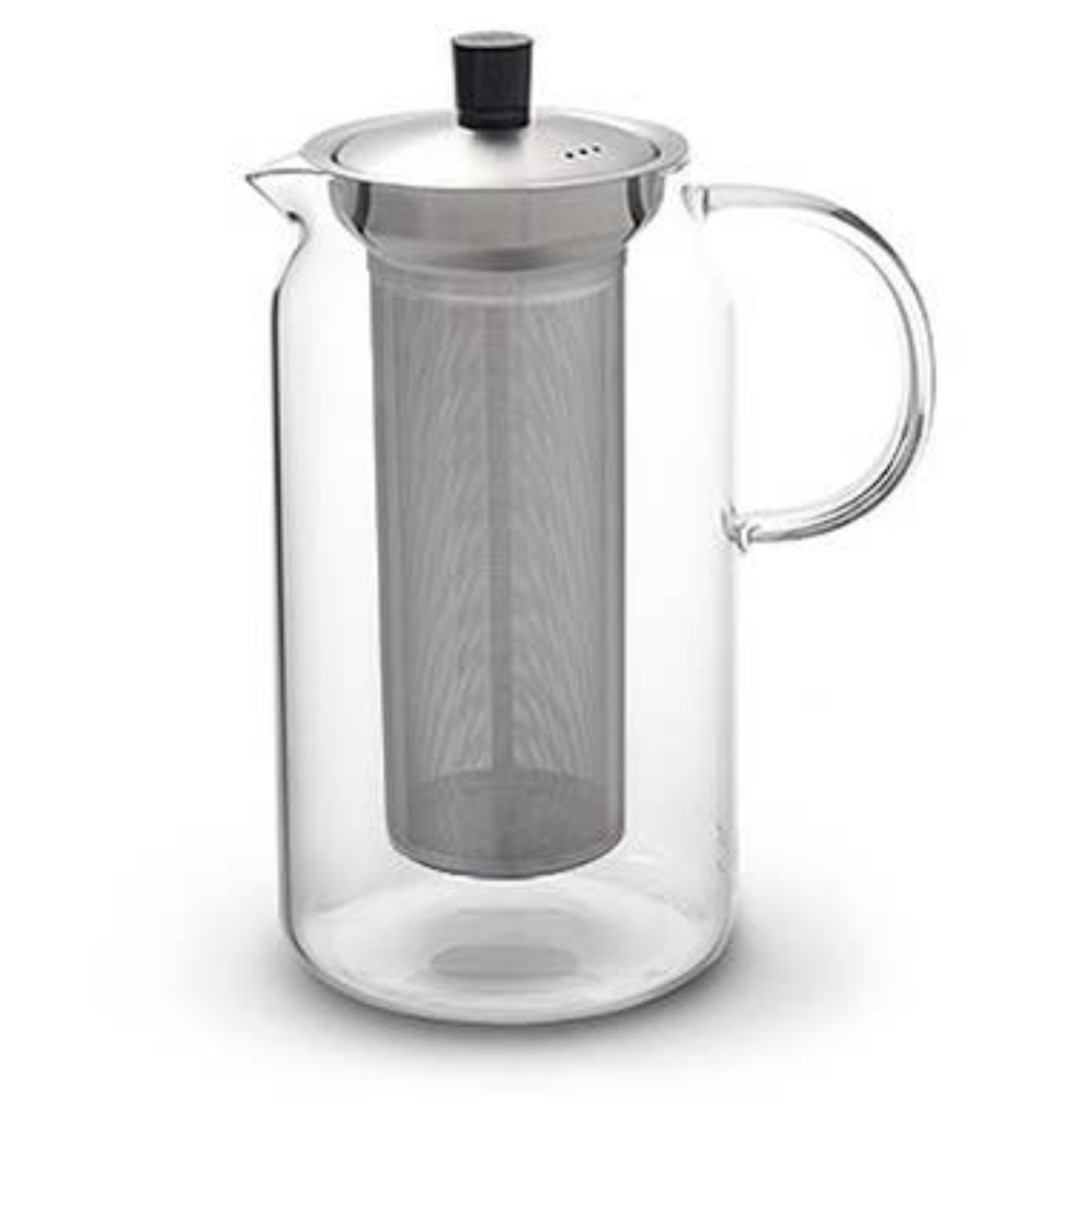 Large Glass Tea Pot with Built-in Infuser-40oz